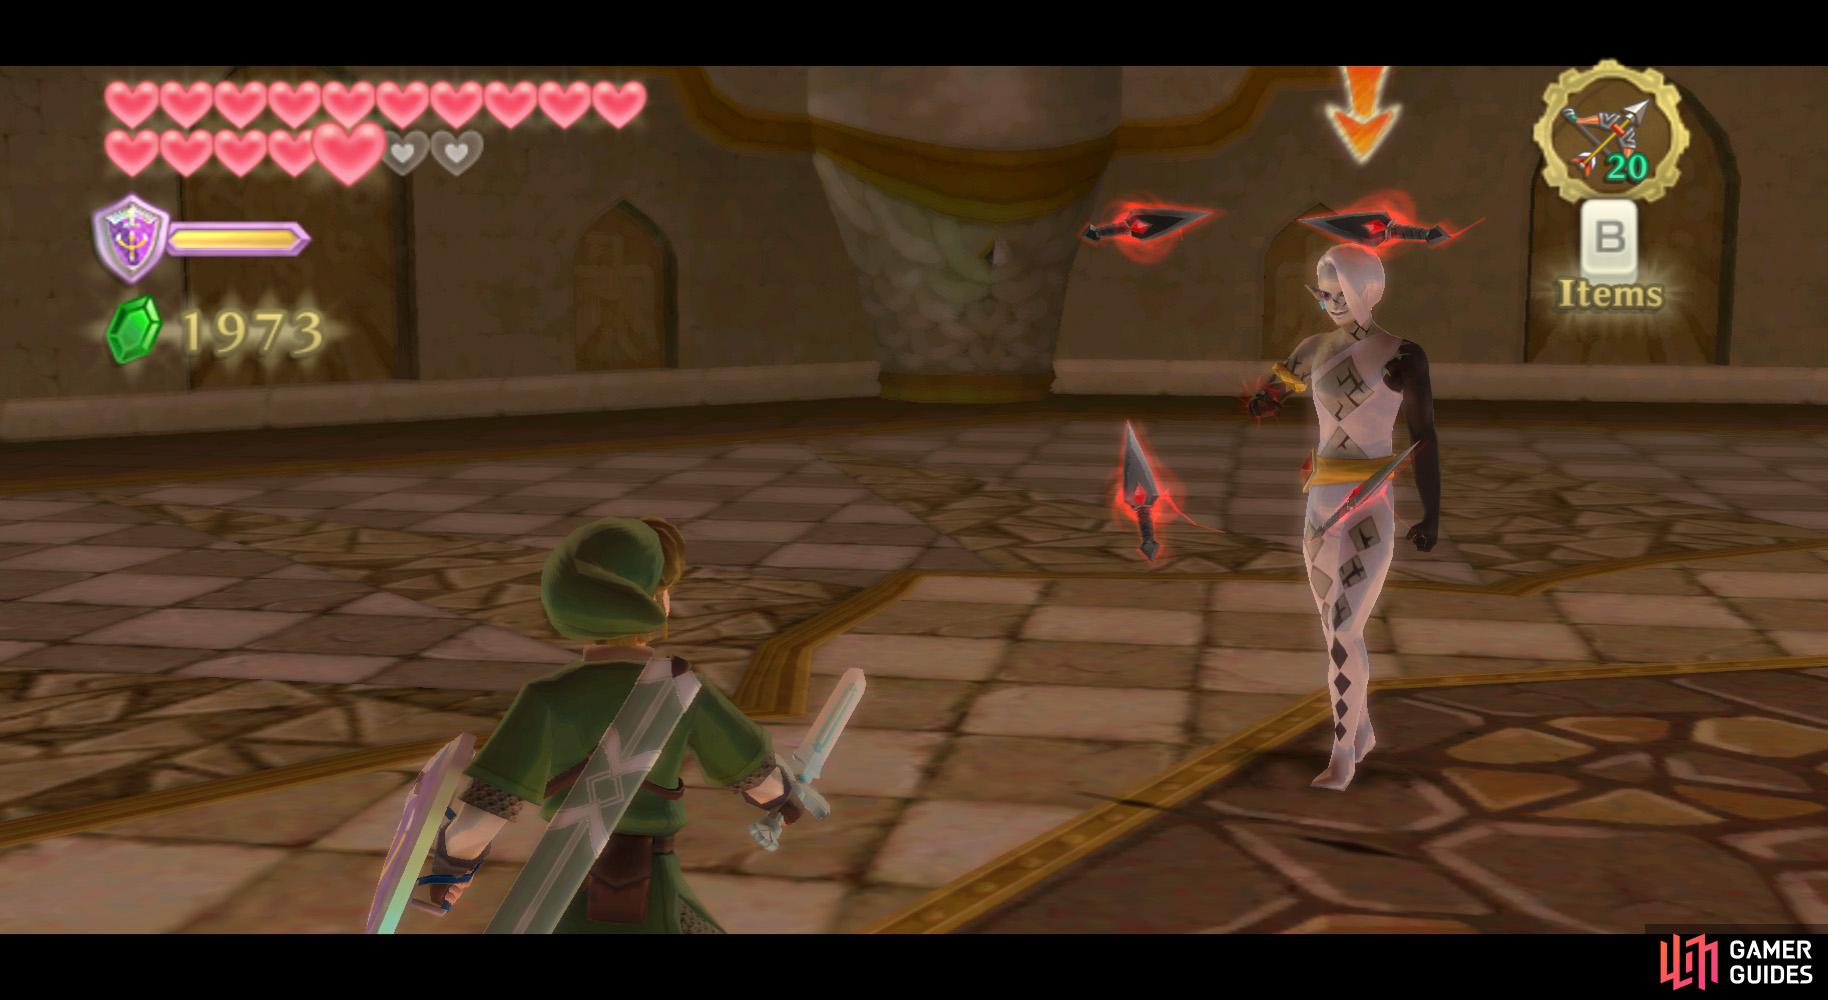 After a while, Ghirahim will have four projectiles in front of him.